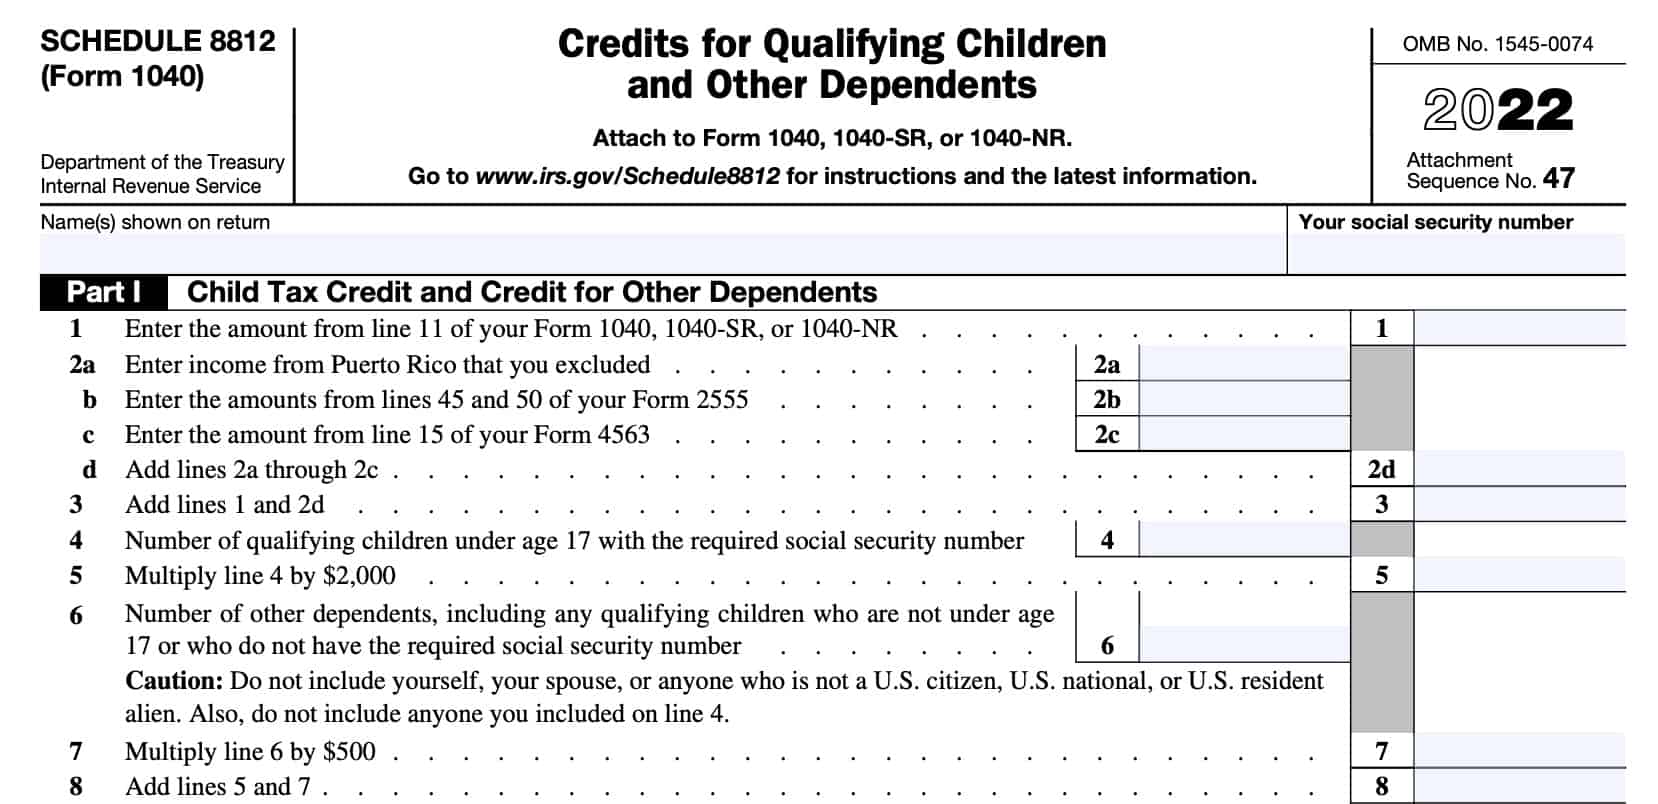 Schedule 8812, part I: child tax credit & credit for other dependents